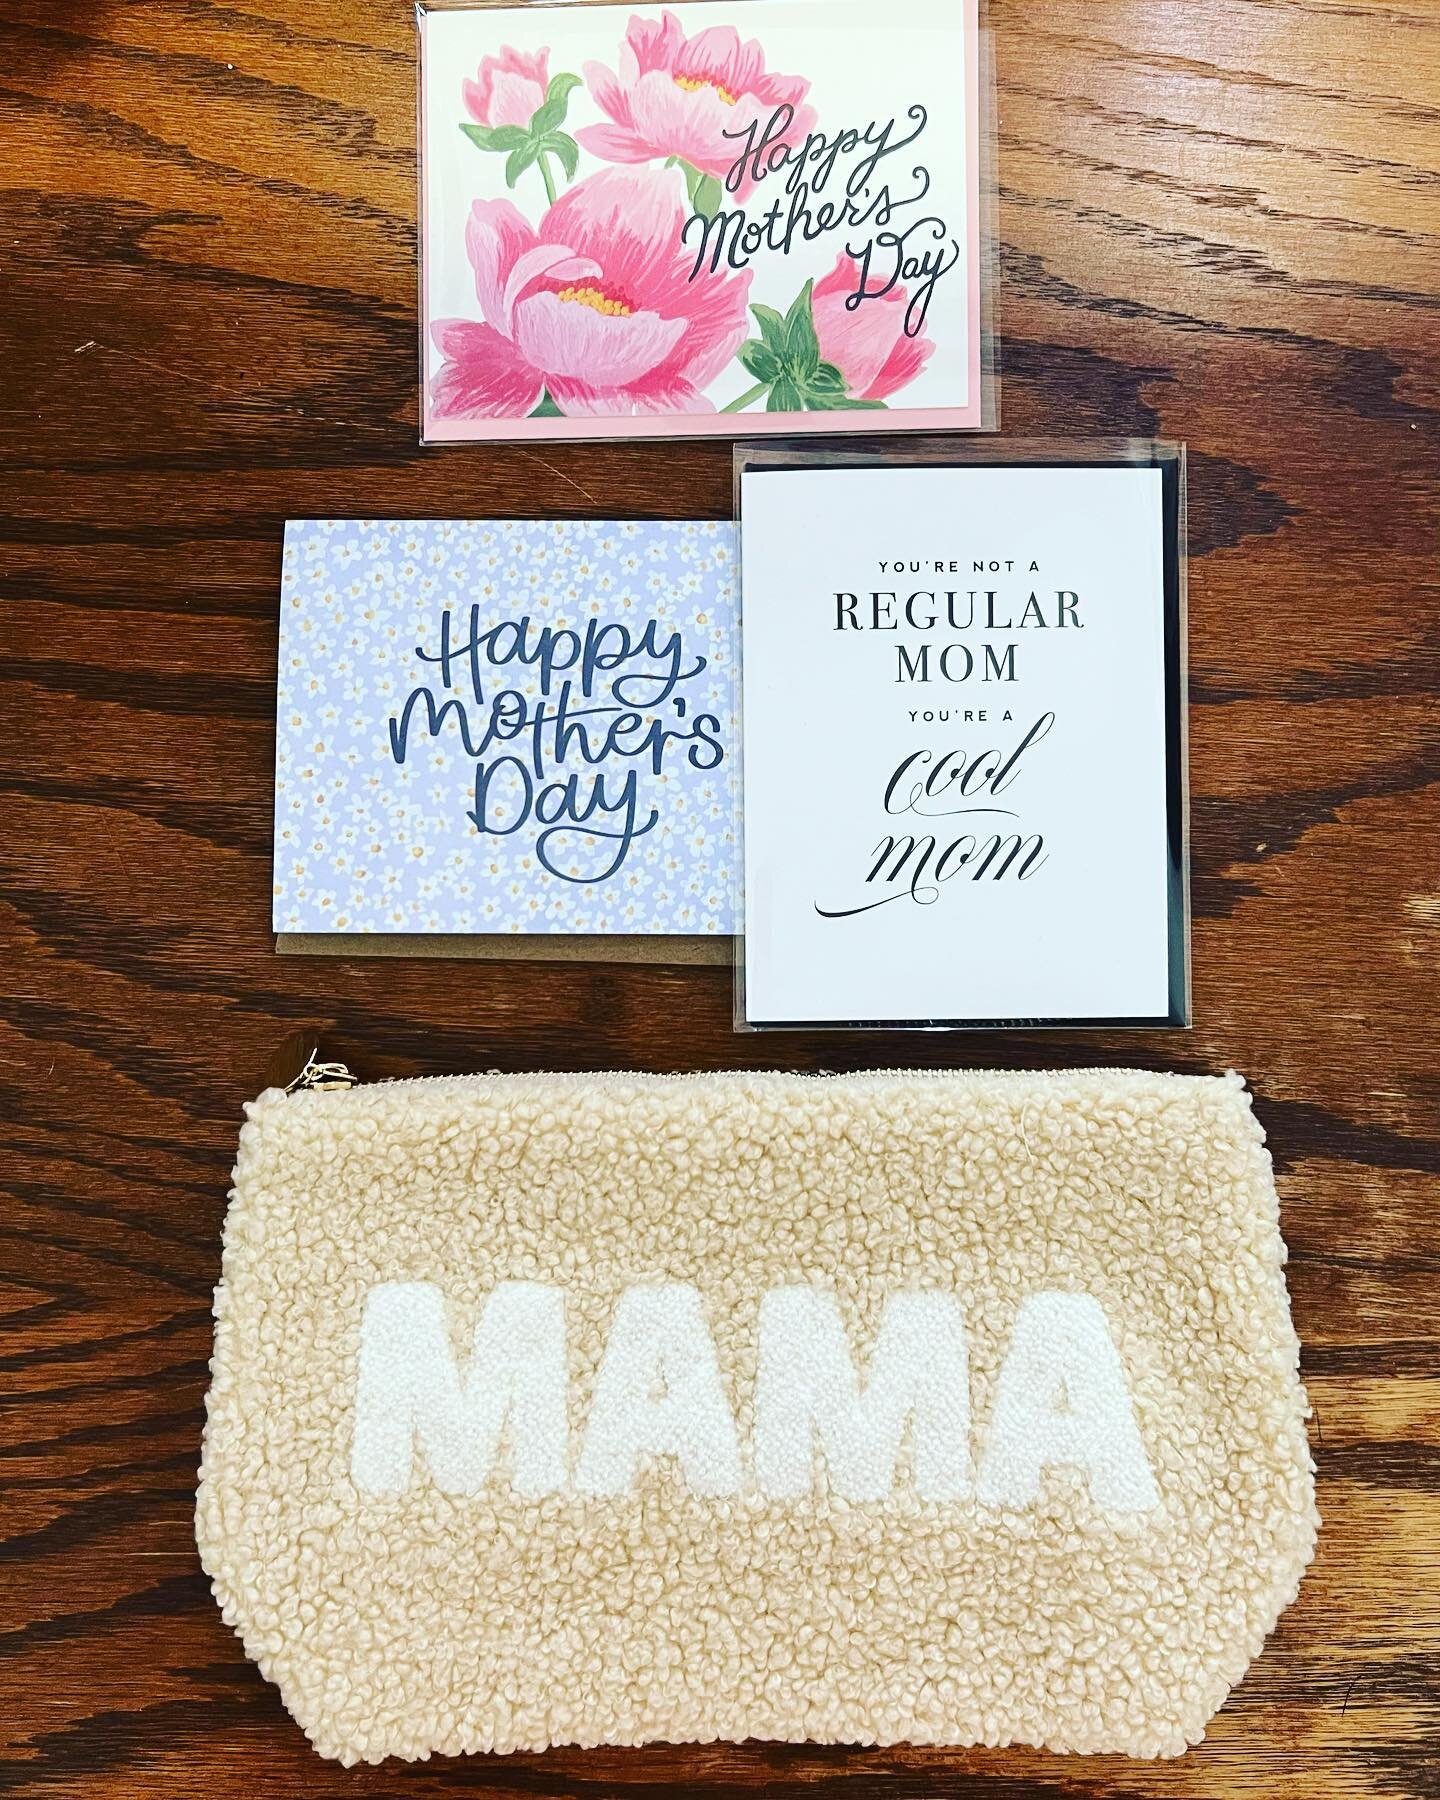 Start Early *Hint, Hint* 💕 #mama #madre #mom #mommy #mothersday